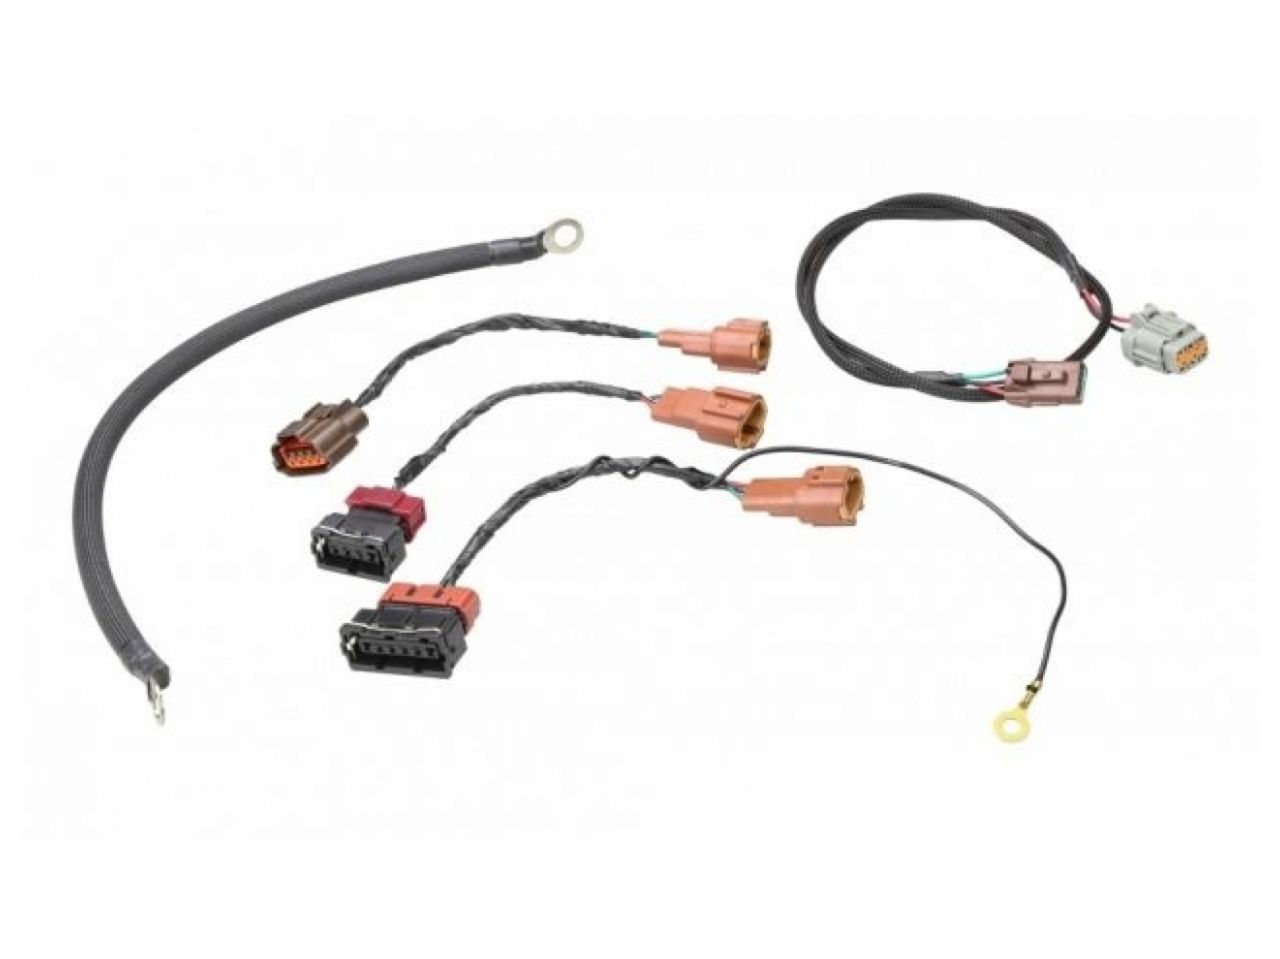 Wiring Specialties S14 SR20DET Wiring Harness for Datsun 510 - PRO SERIES